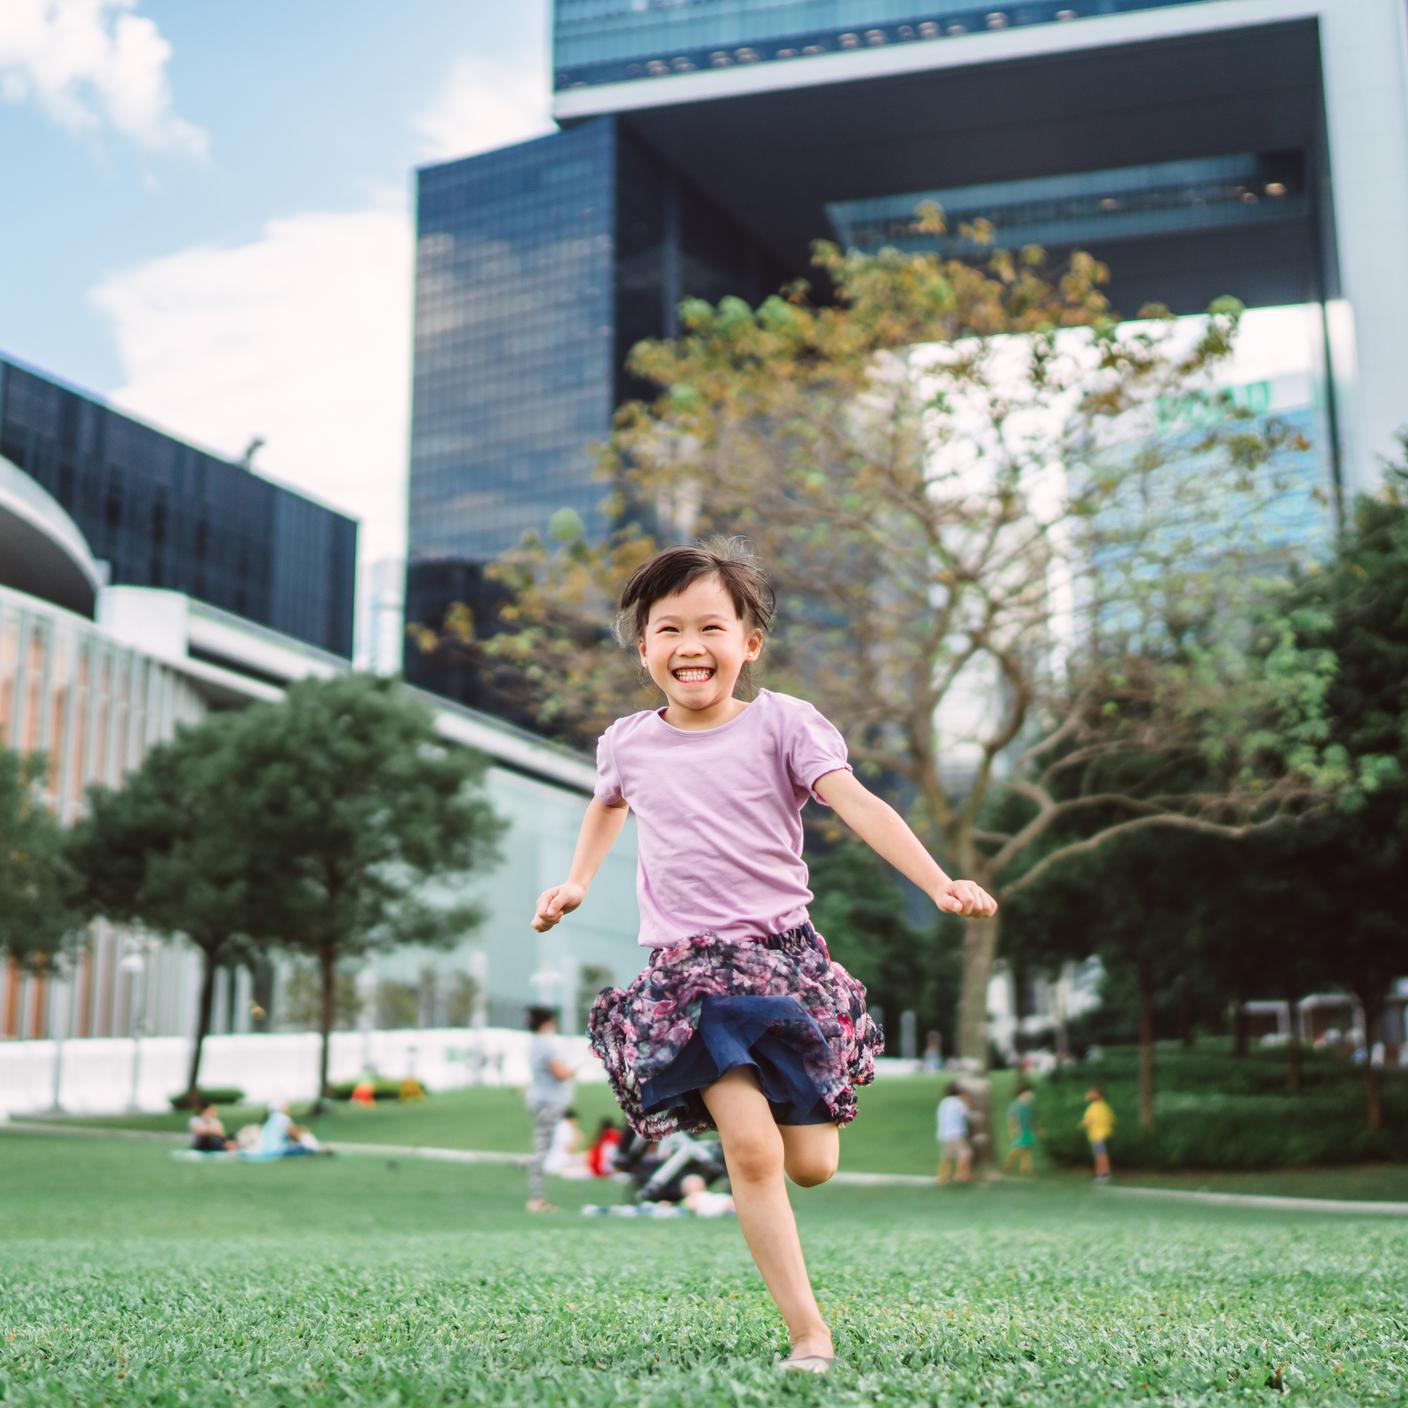 Girl running on grass in front of building